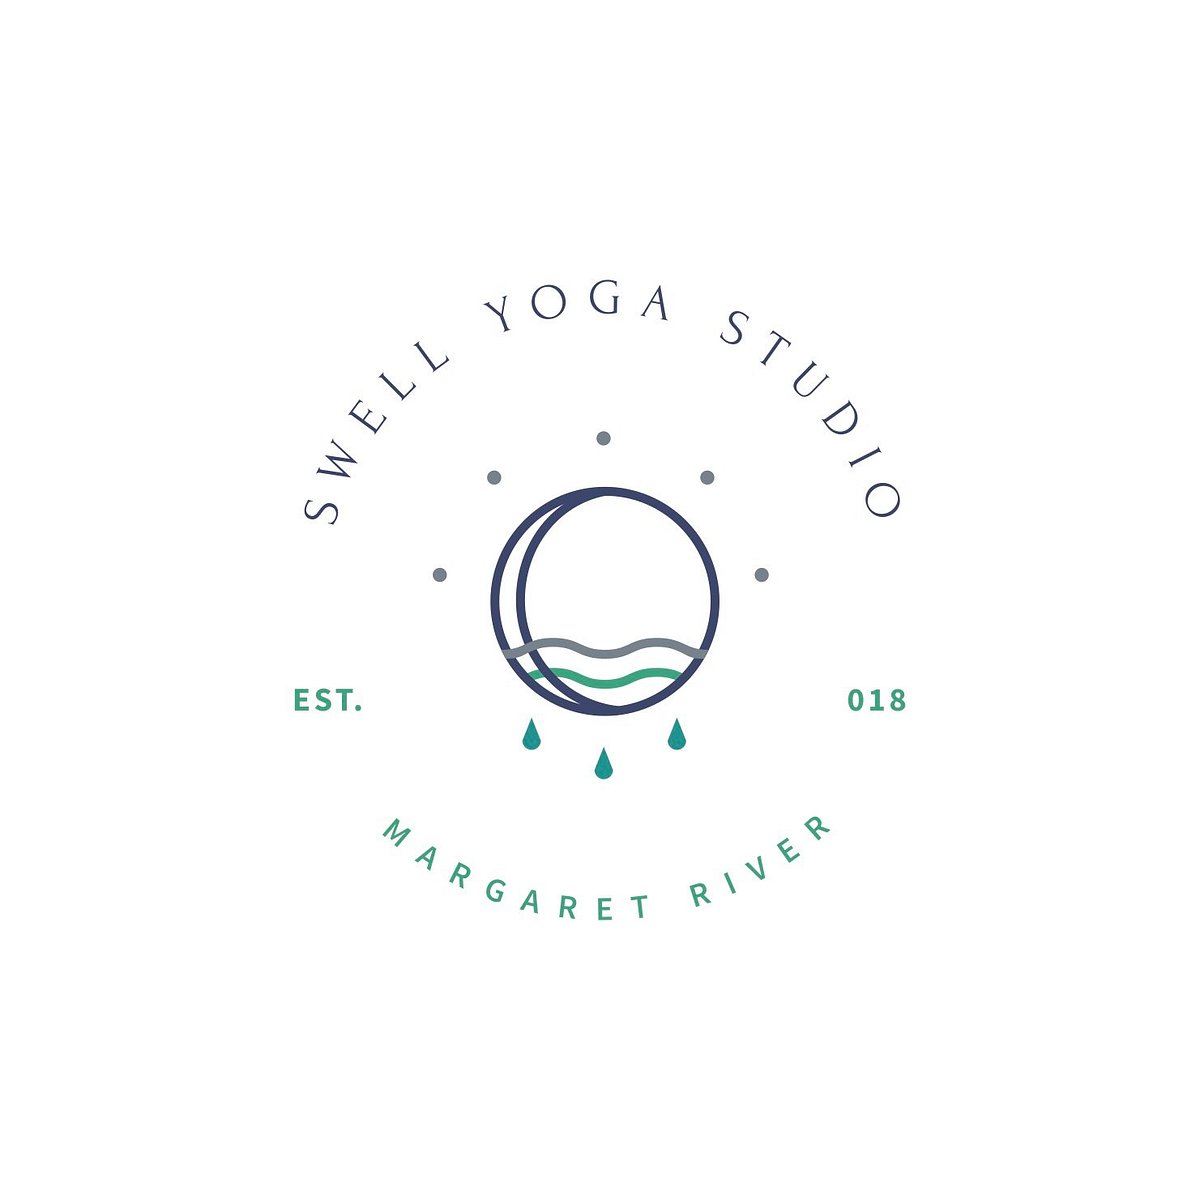 about – Swell Yoga